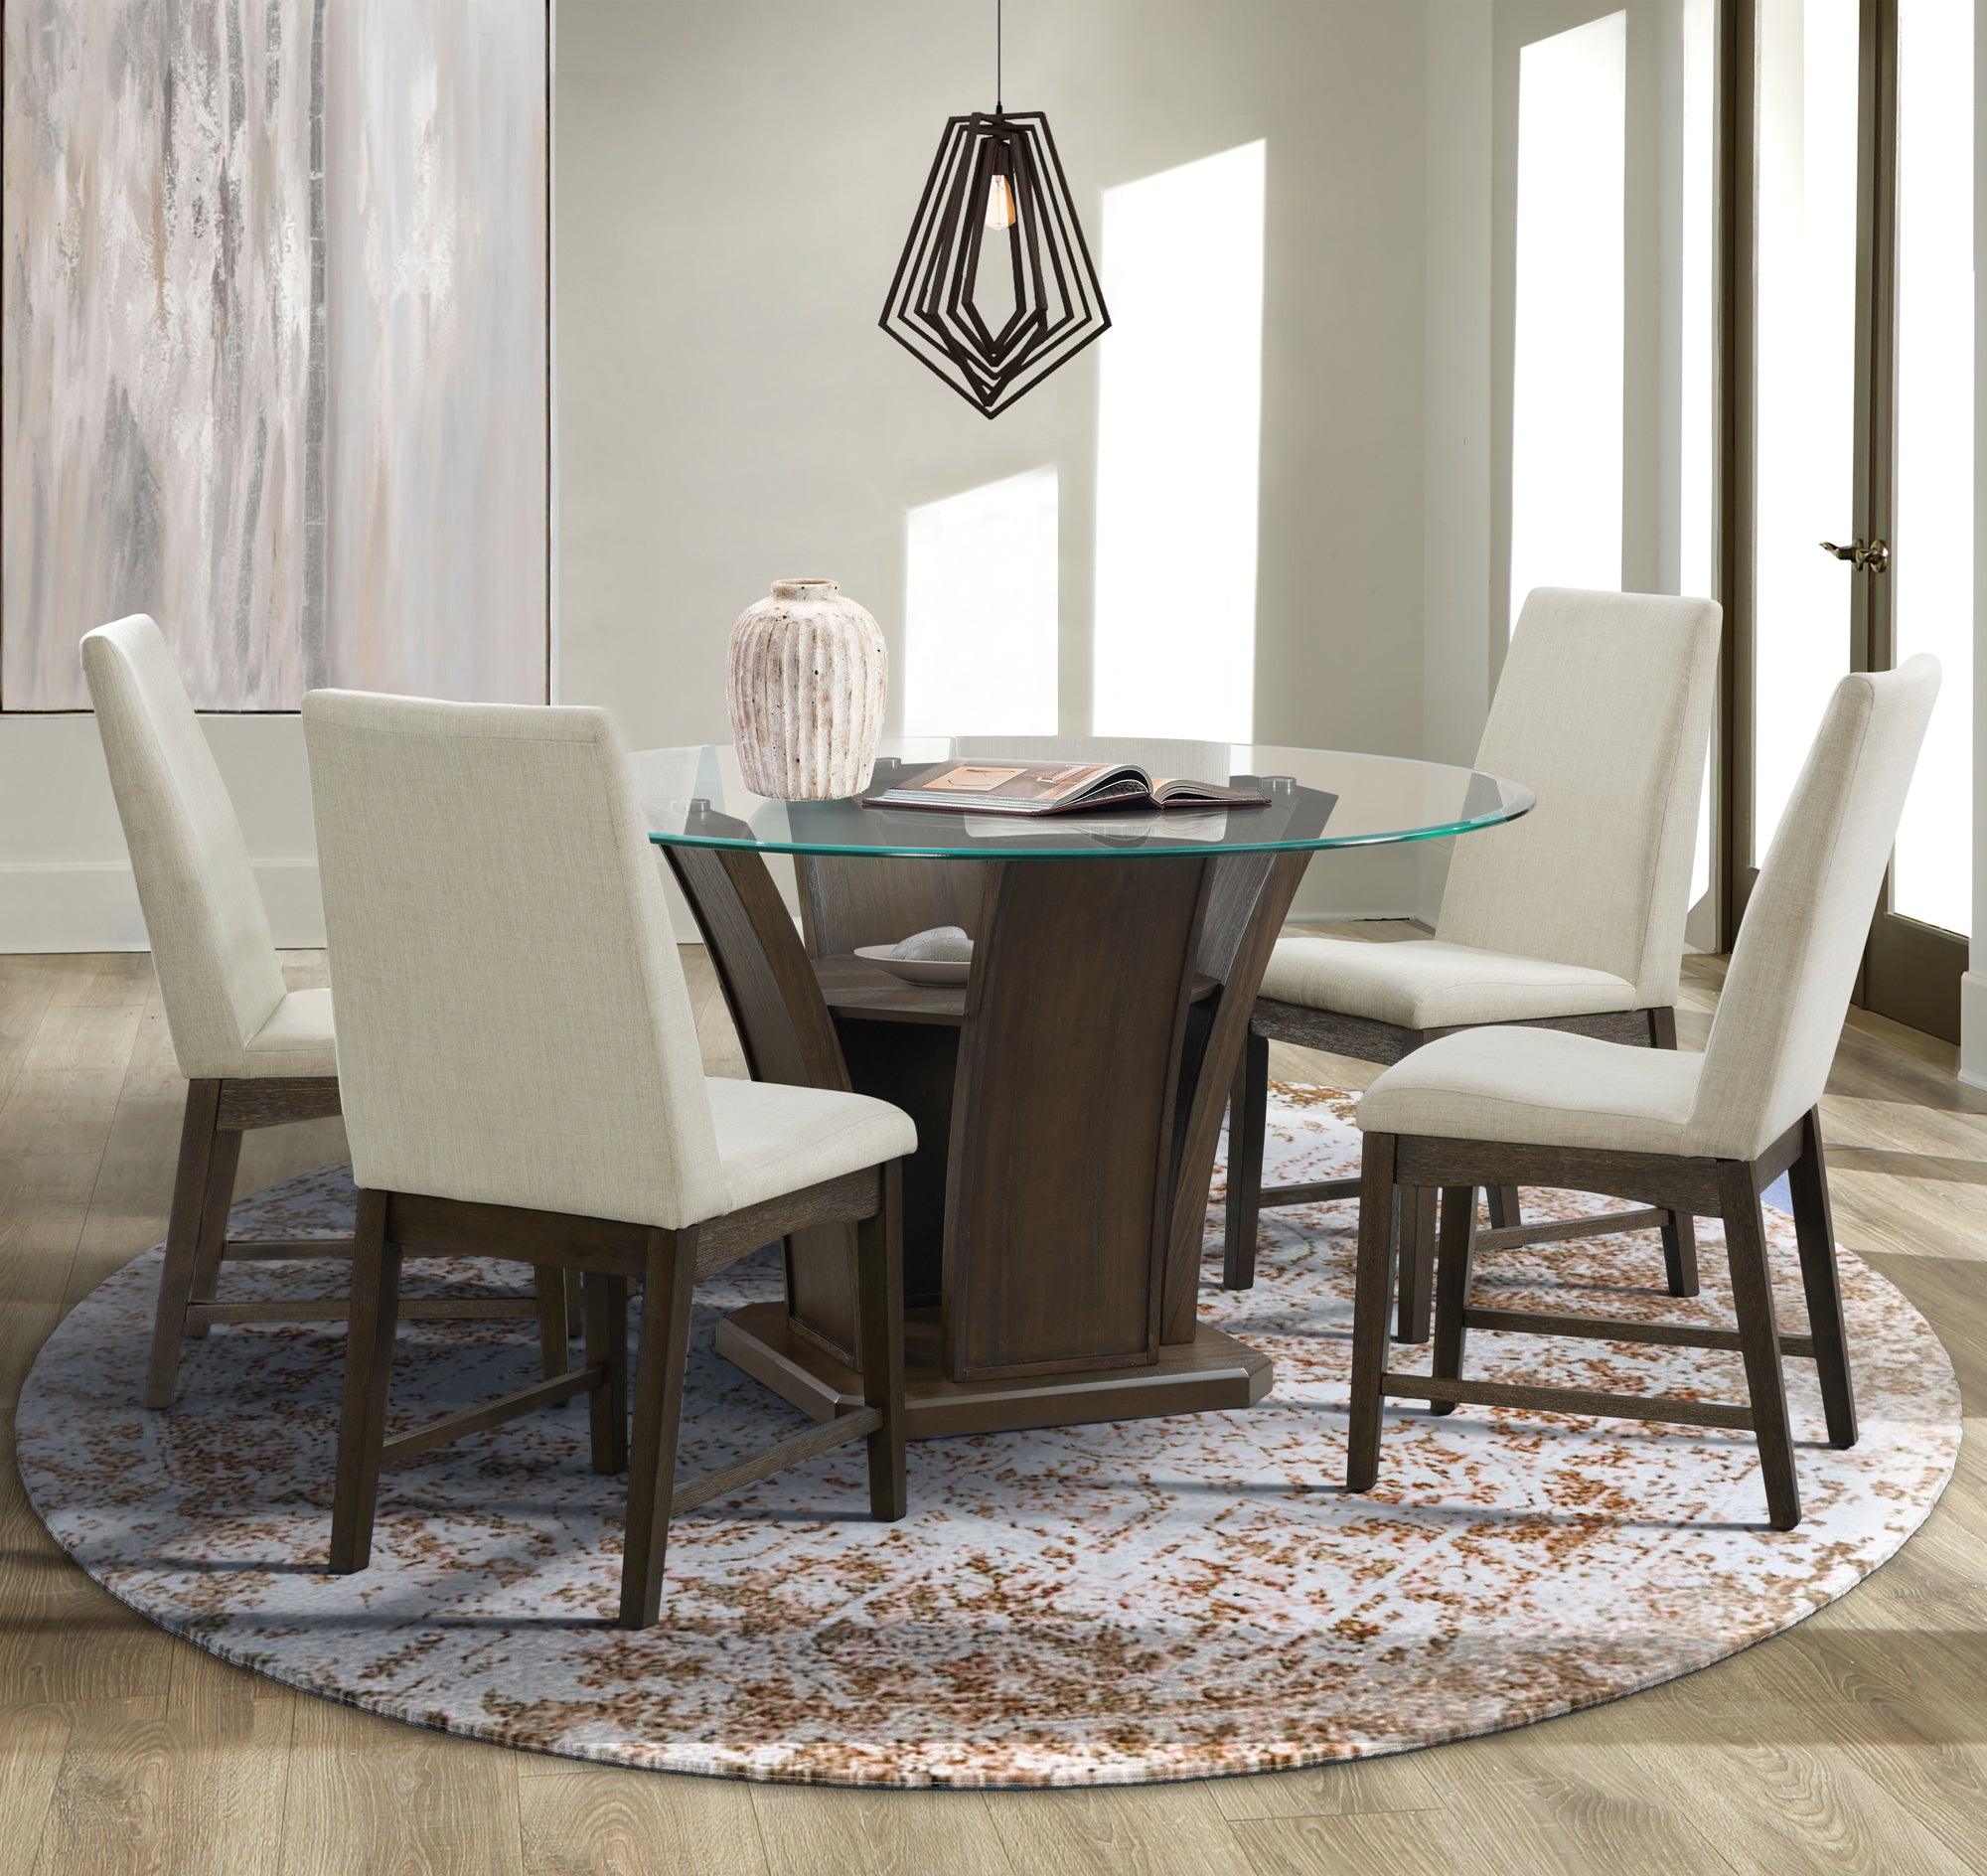 Elements Dining Tables - Simms Round Standard Height Dining Table in Walnut